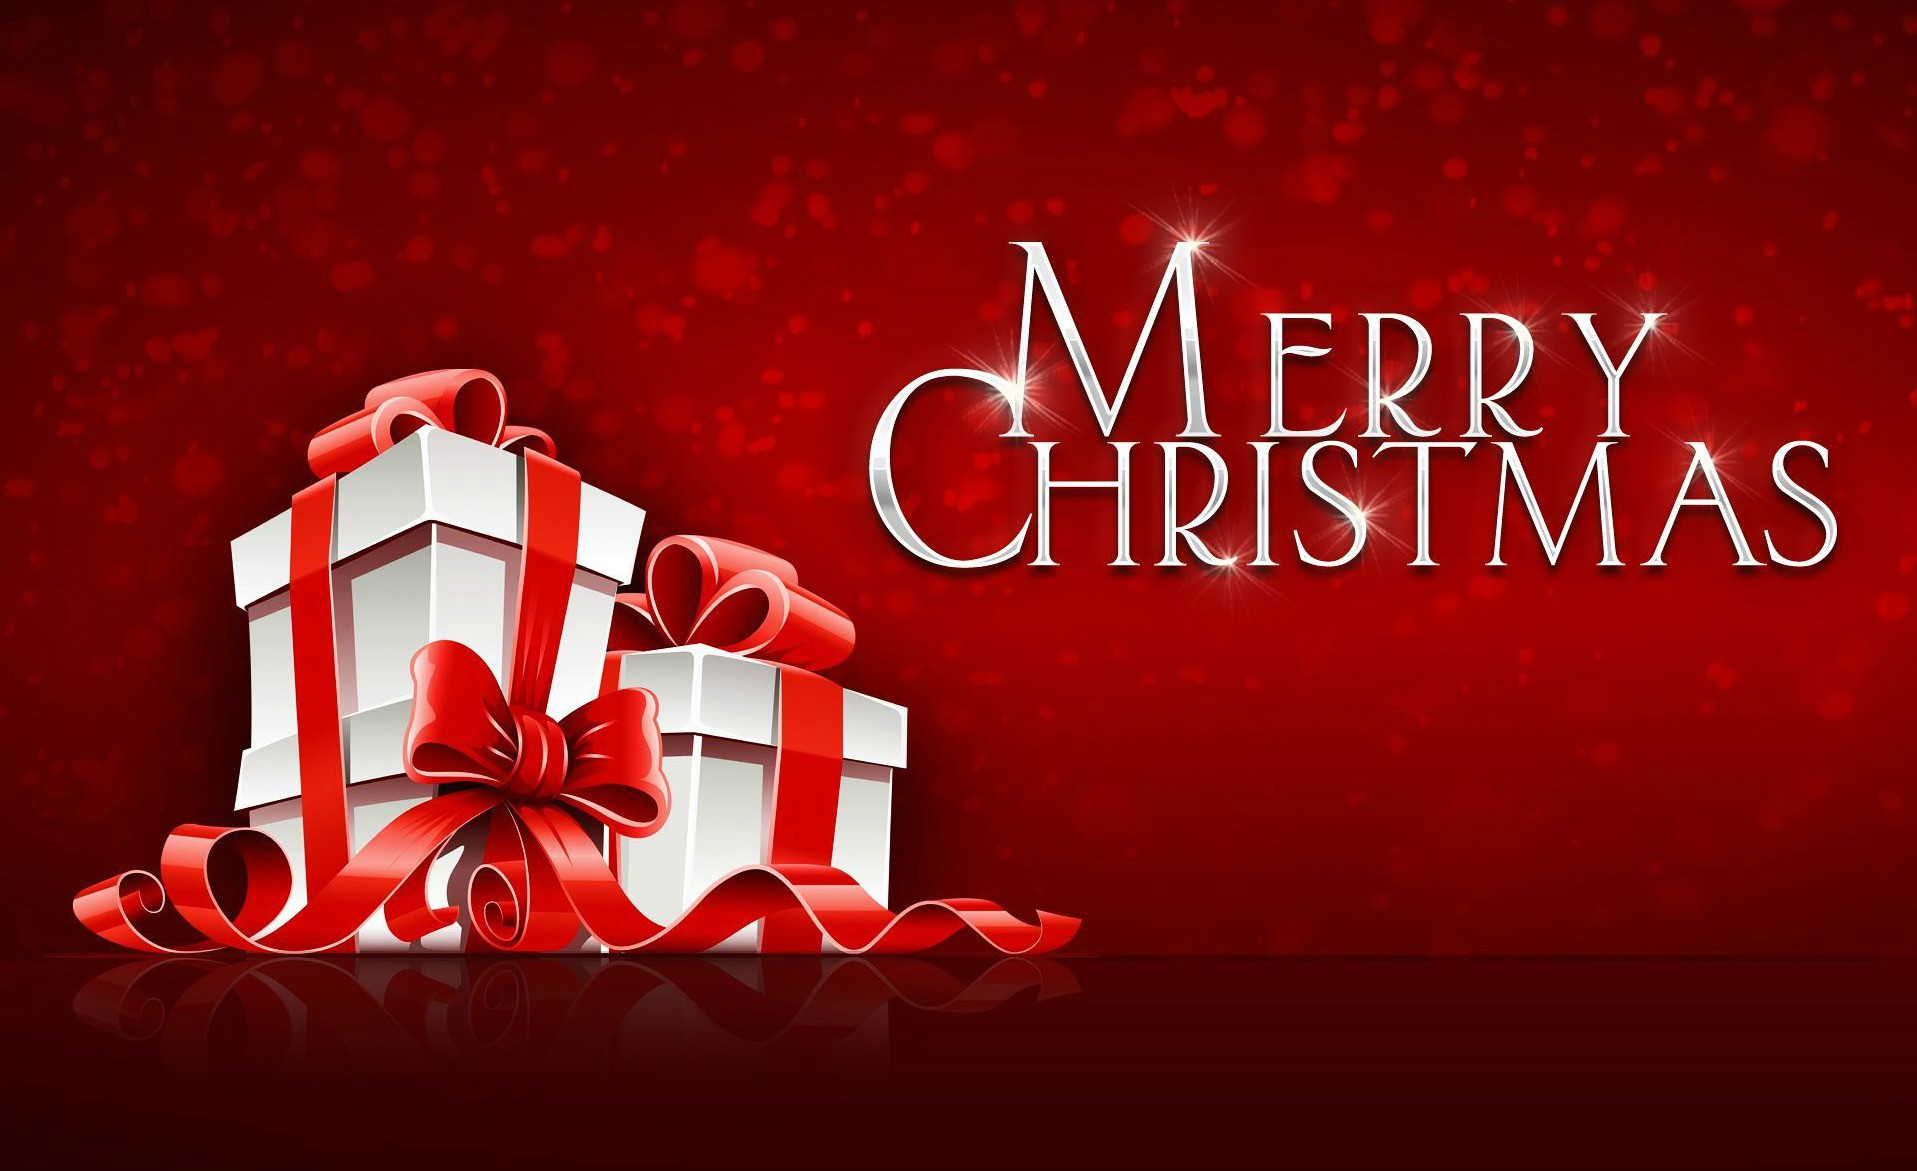 Merry Christmas Everyone Quotes
 The 21 Best Ideas for Merry Christmas Everyone Quote